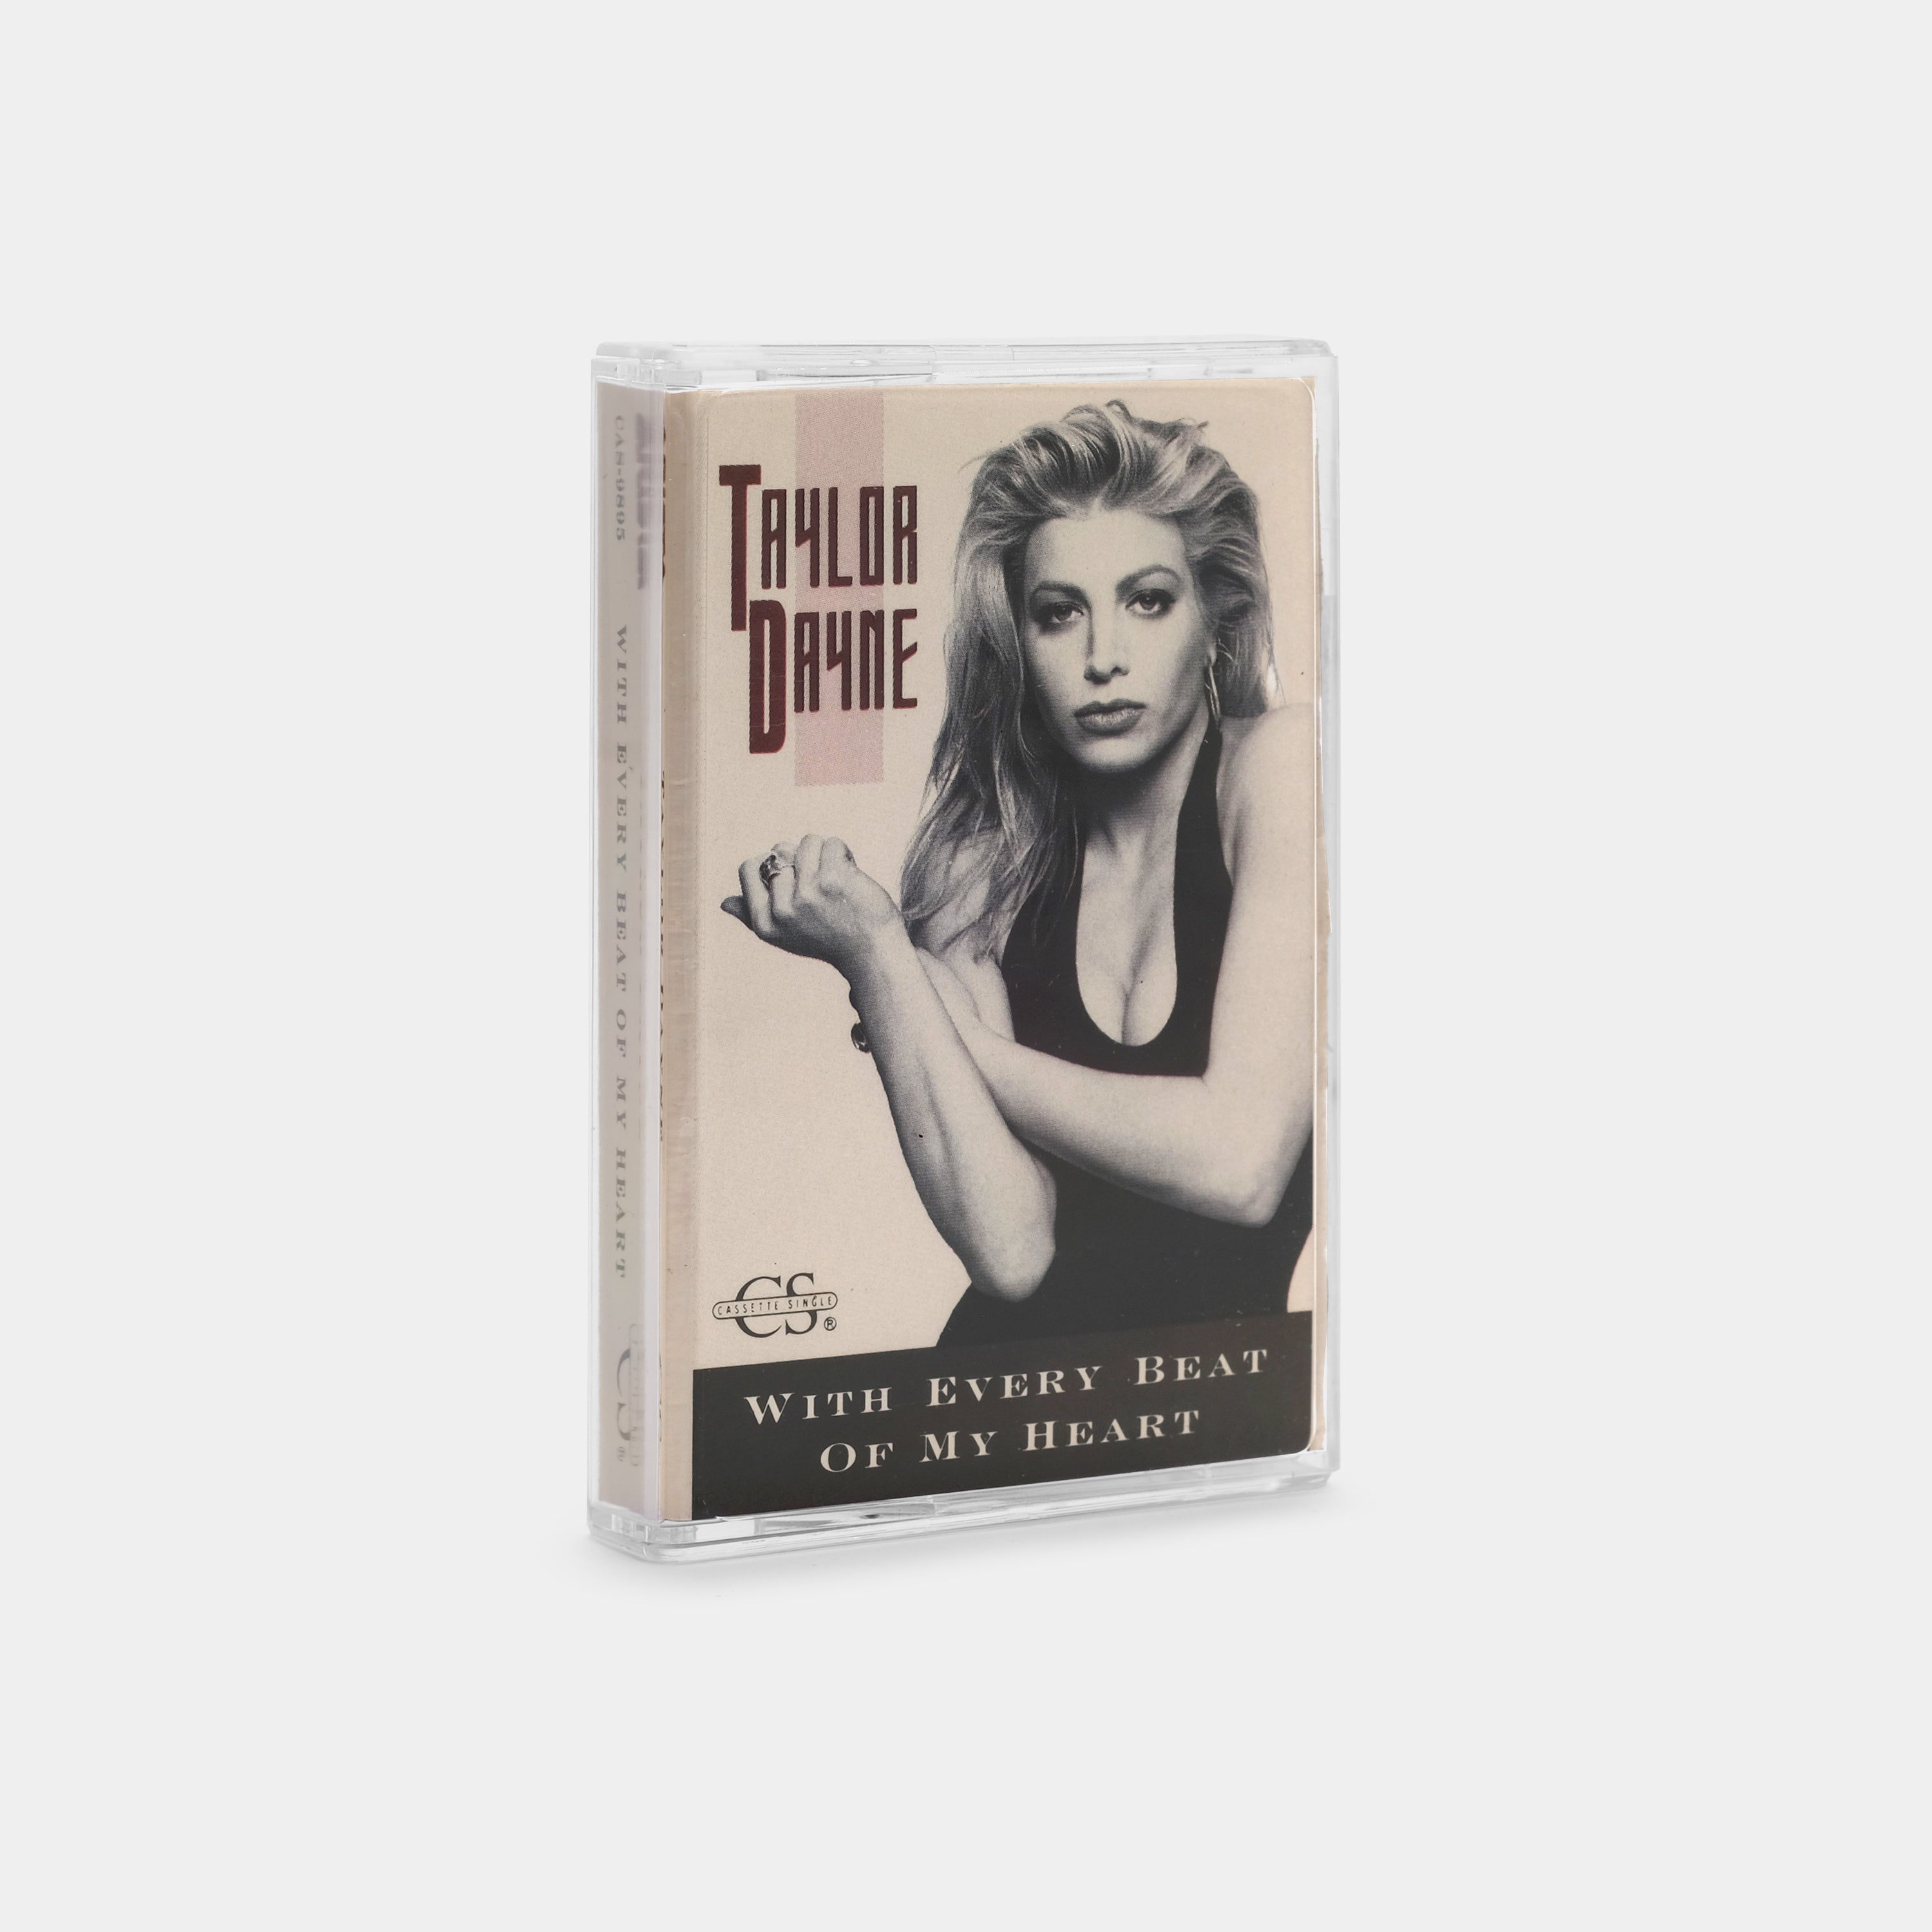 Taylor Dayne - With Every Beat of My Heart Cassette Tape